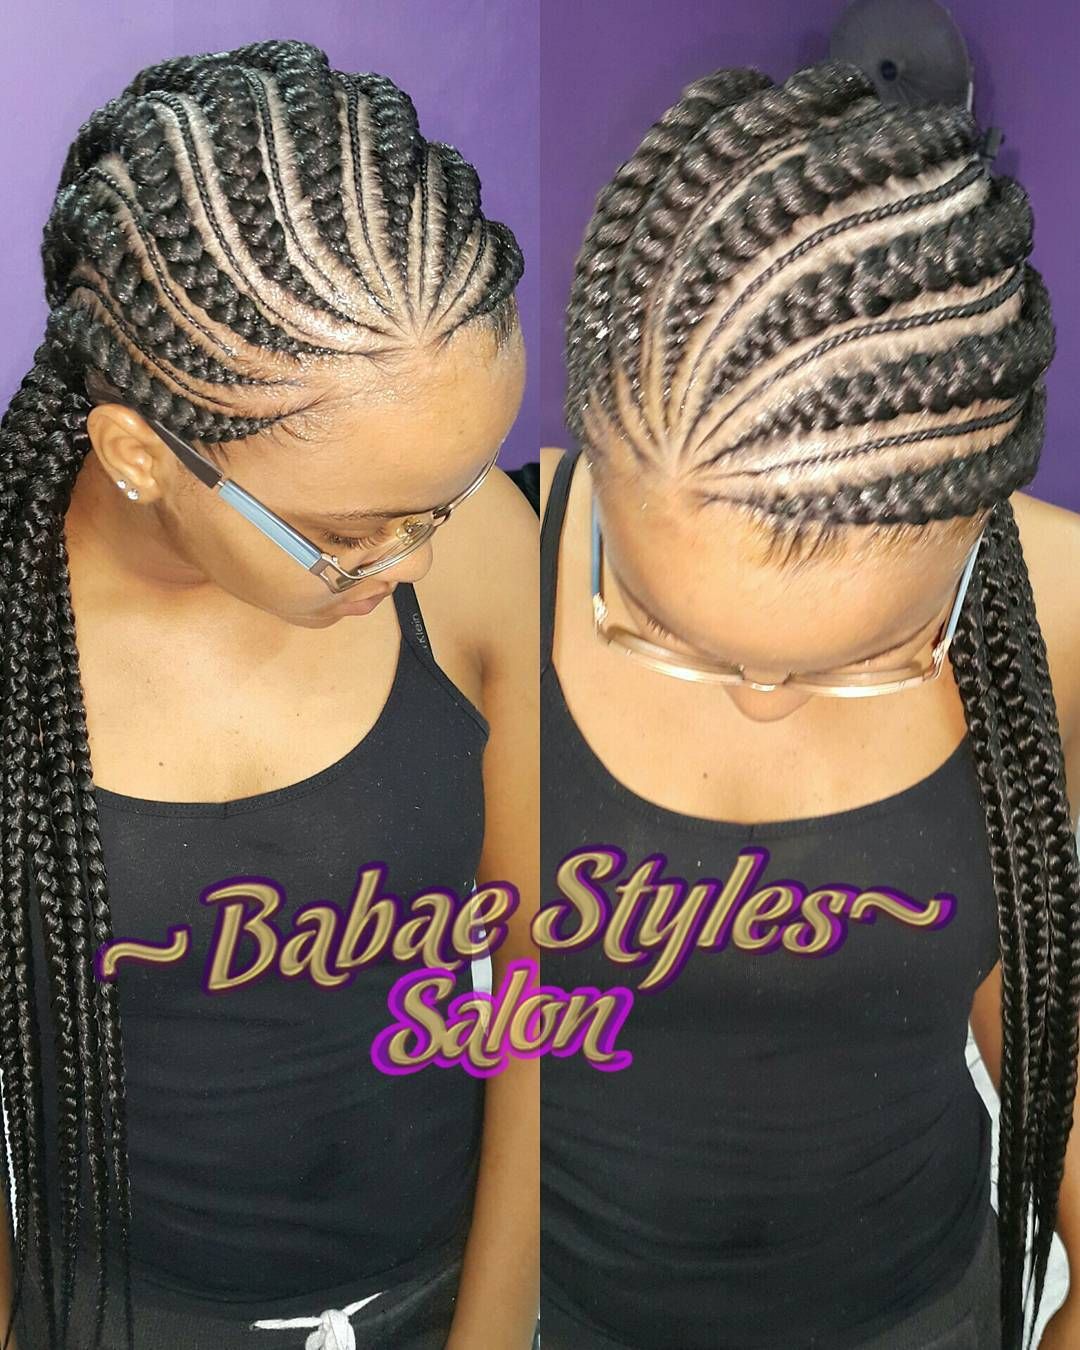 Babae Styles Sálon on Instagram “BRAIDS 😍😍😍babaestylessalon ❤ whatsapp or call us at 3718400 OR 8745937 appointmentsonly we raising BARS 📈 📈🎯🎯😉”